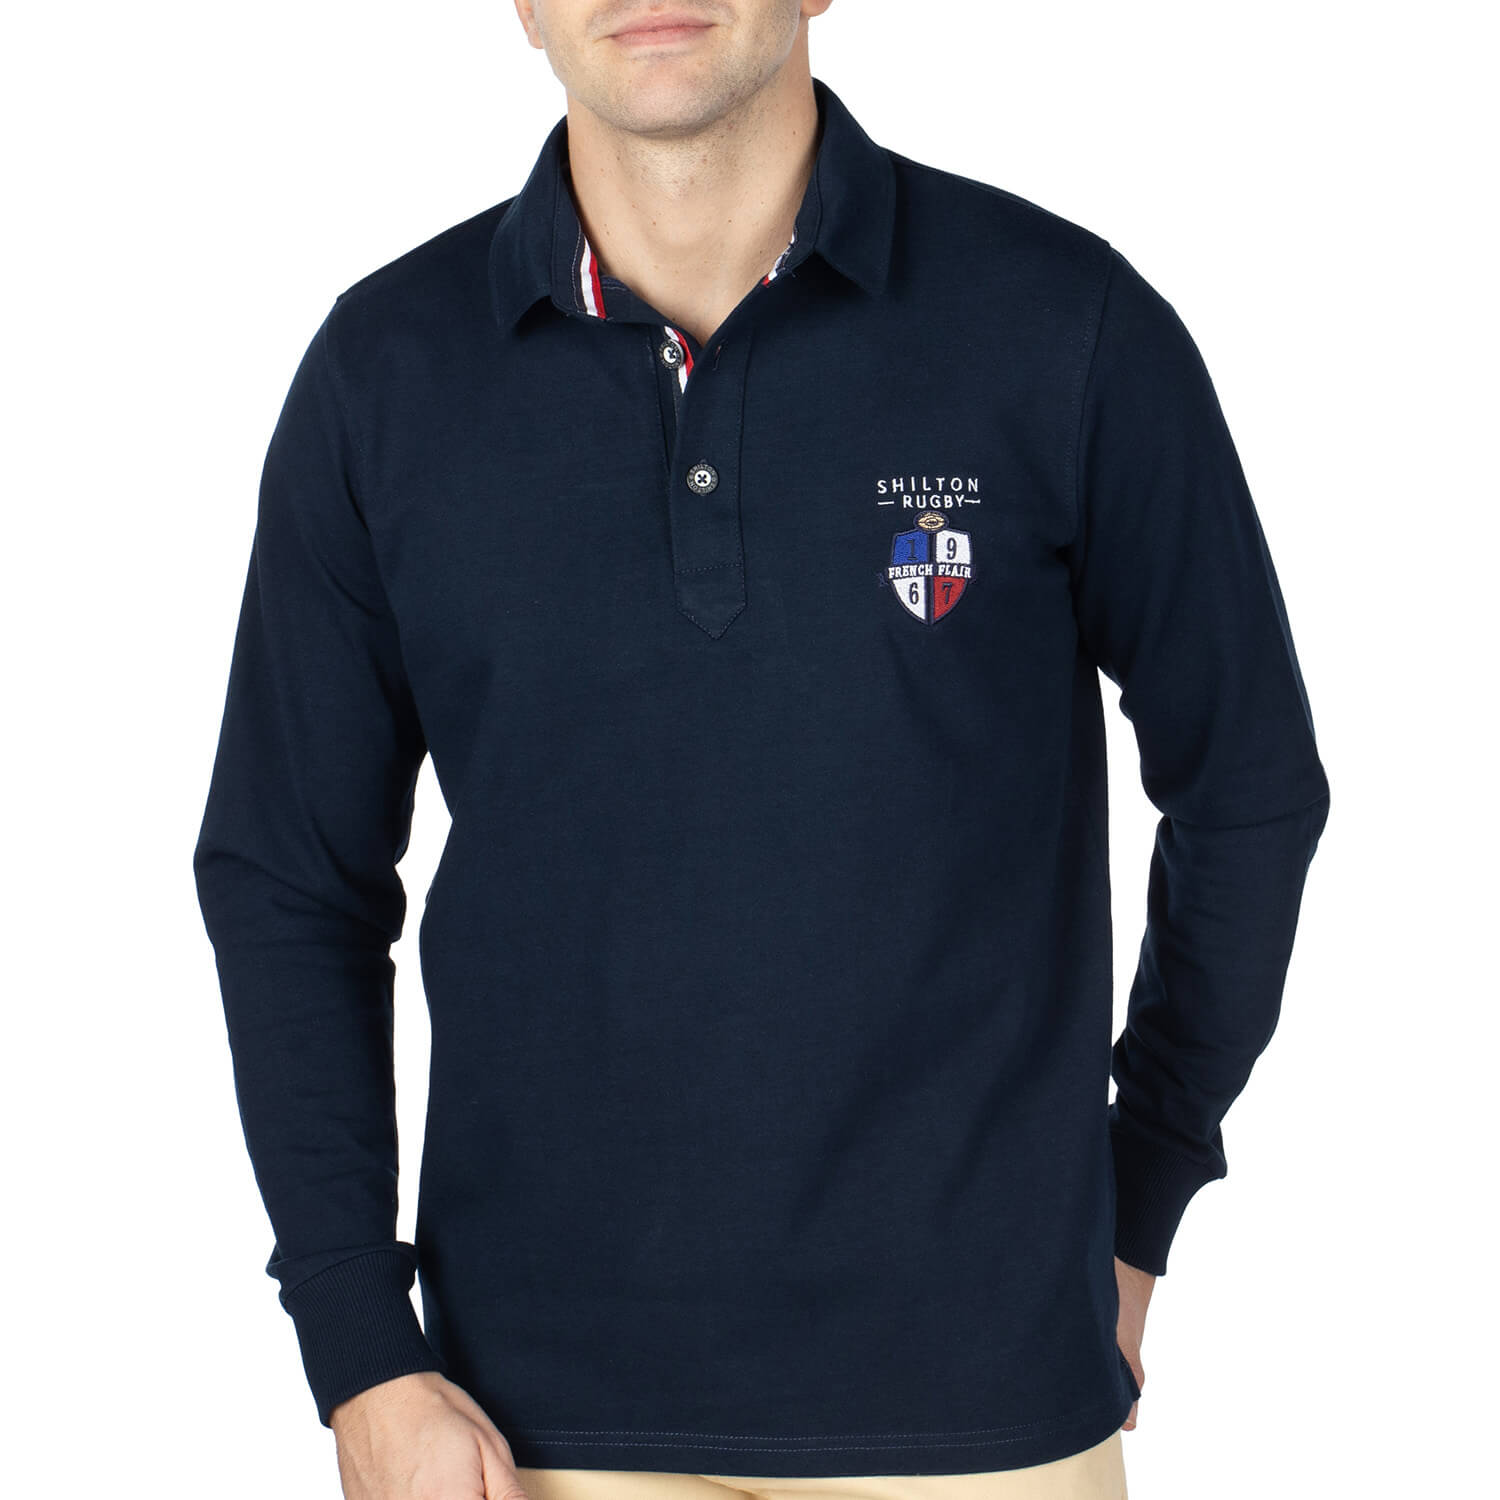 Polo rugby french flair